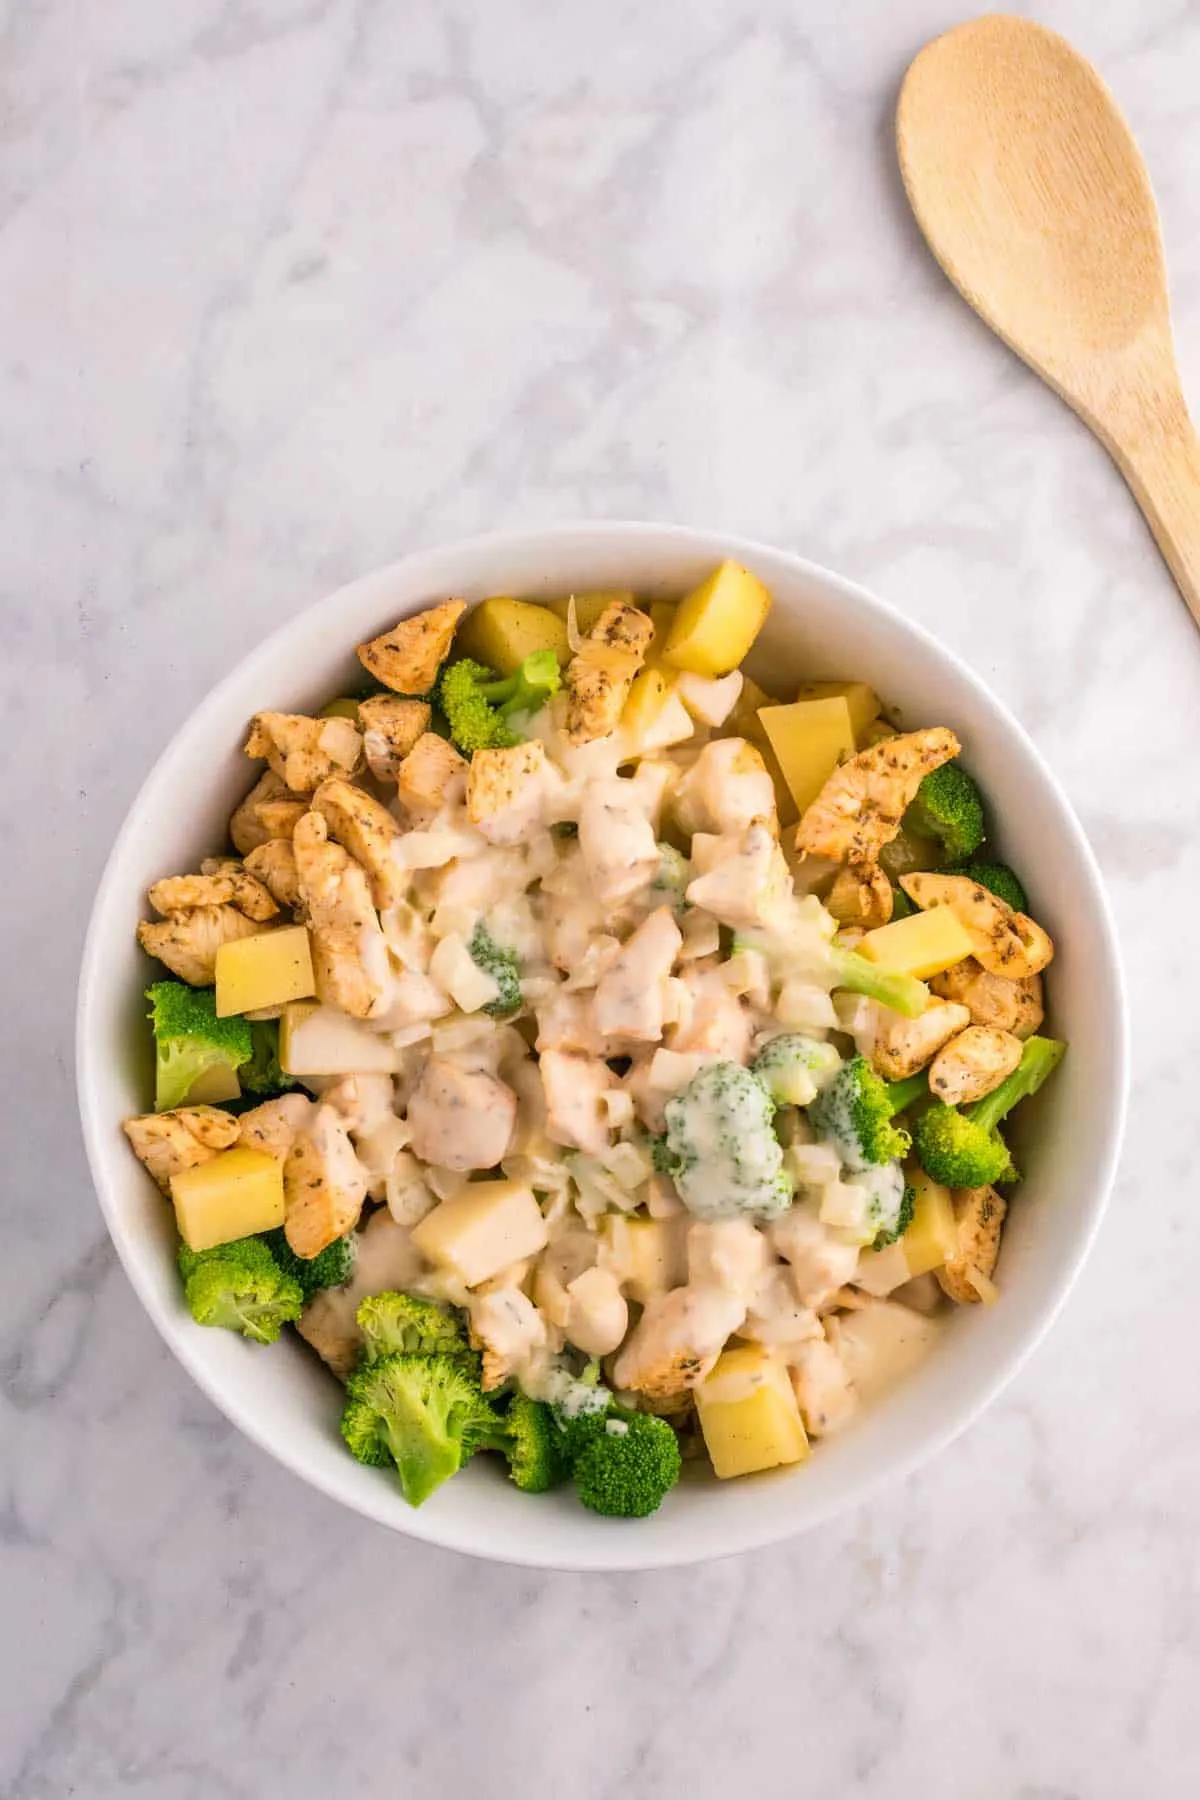 creamy sauce poured over chicken, broccoli and potatoes in a bowl